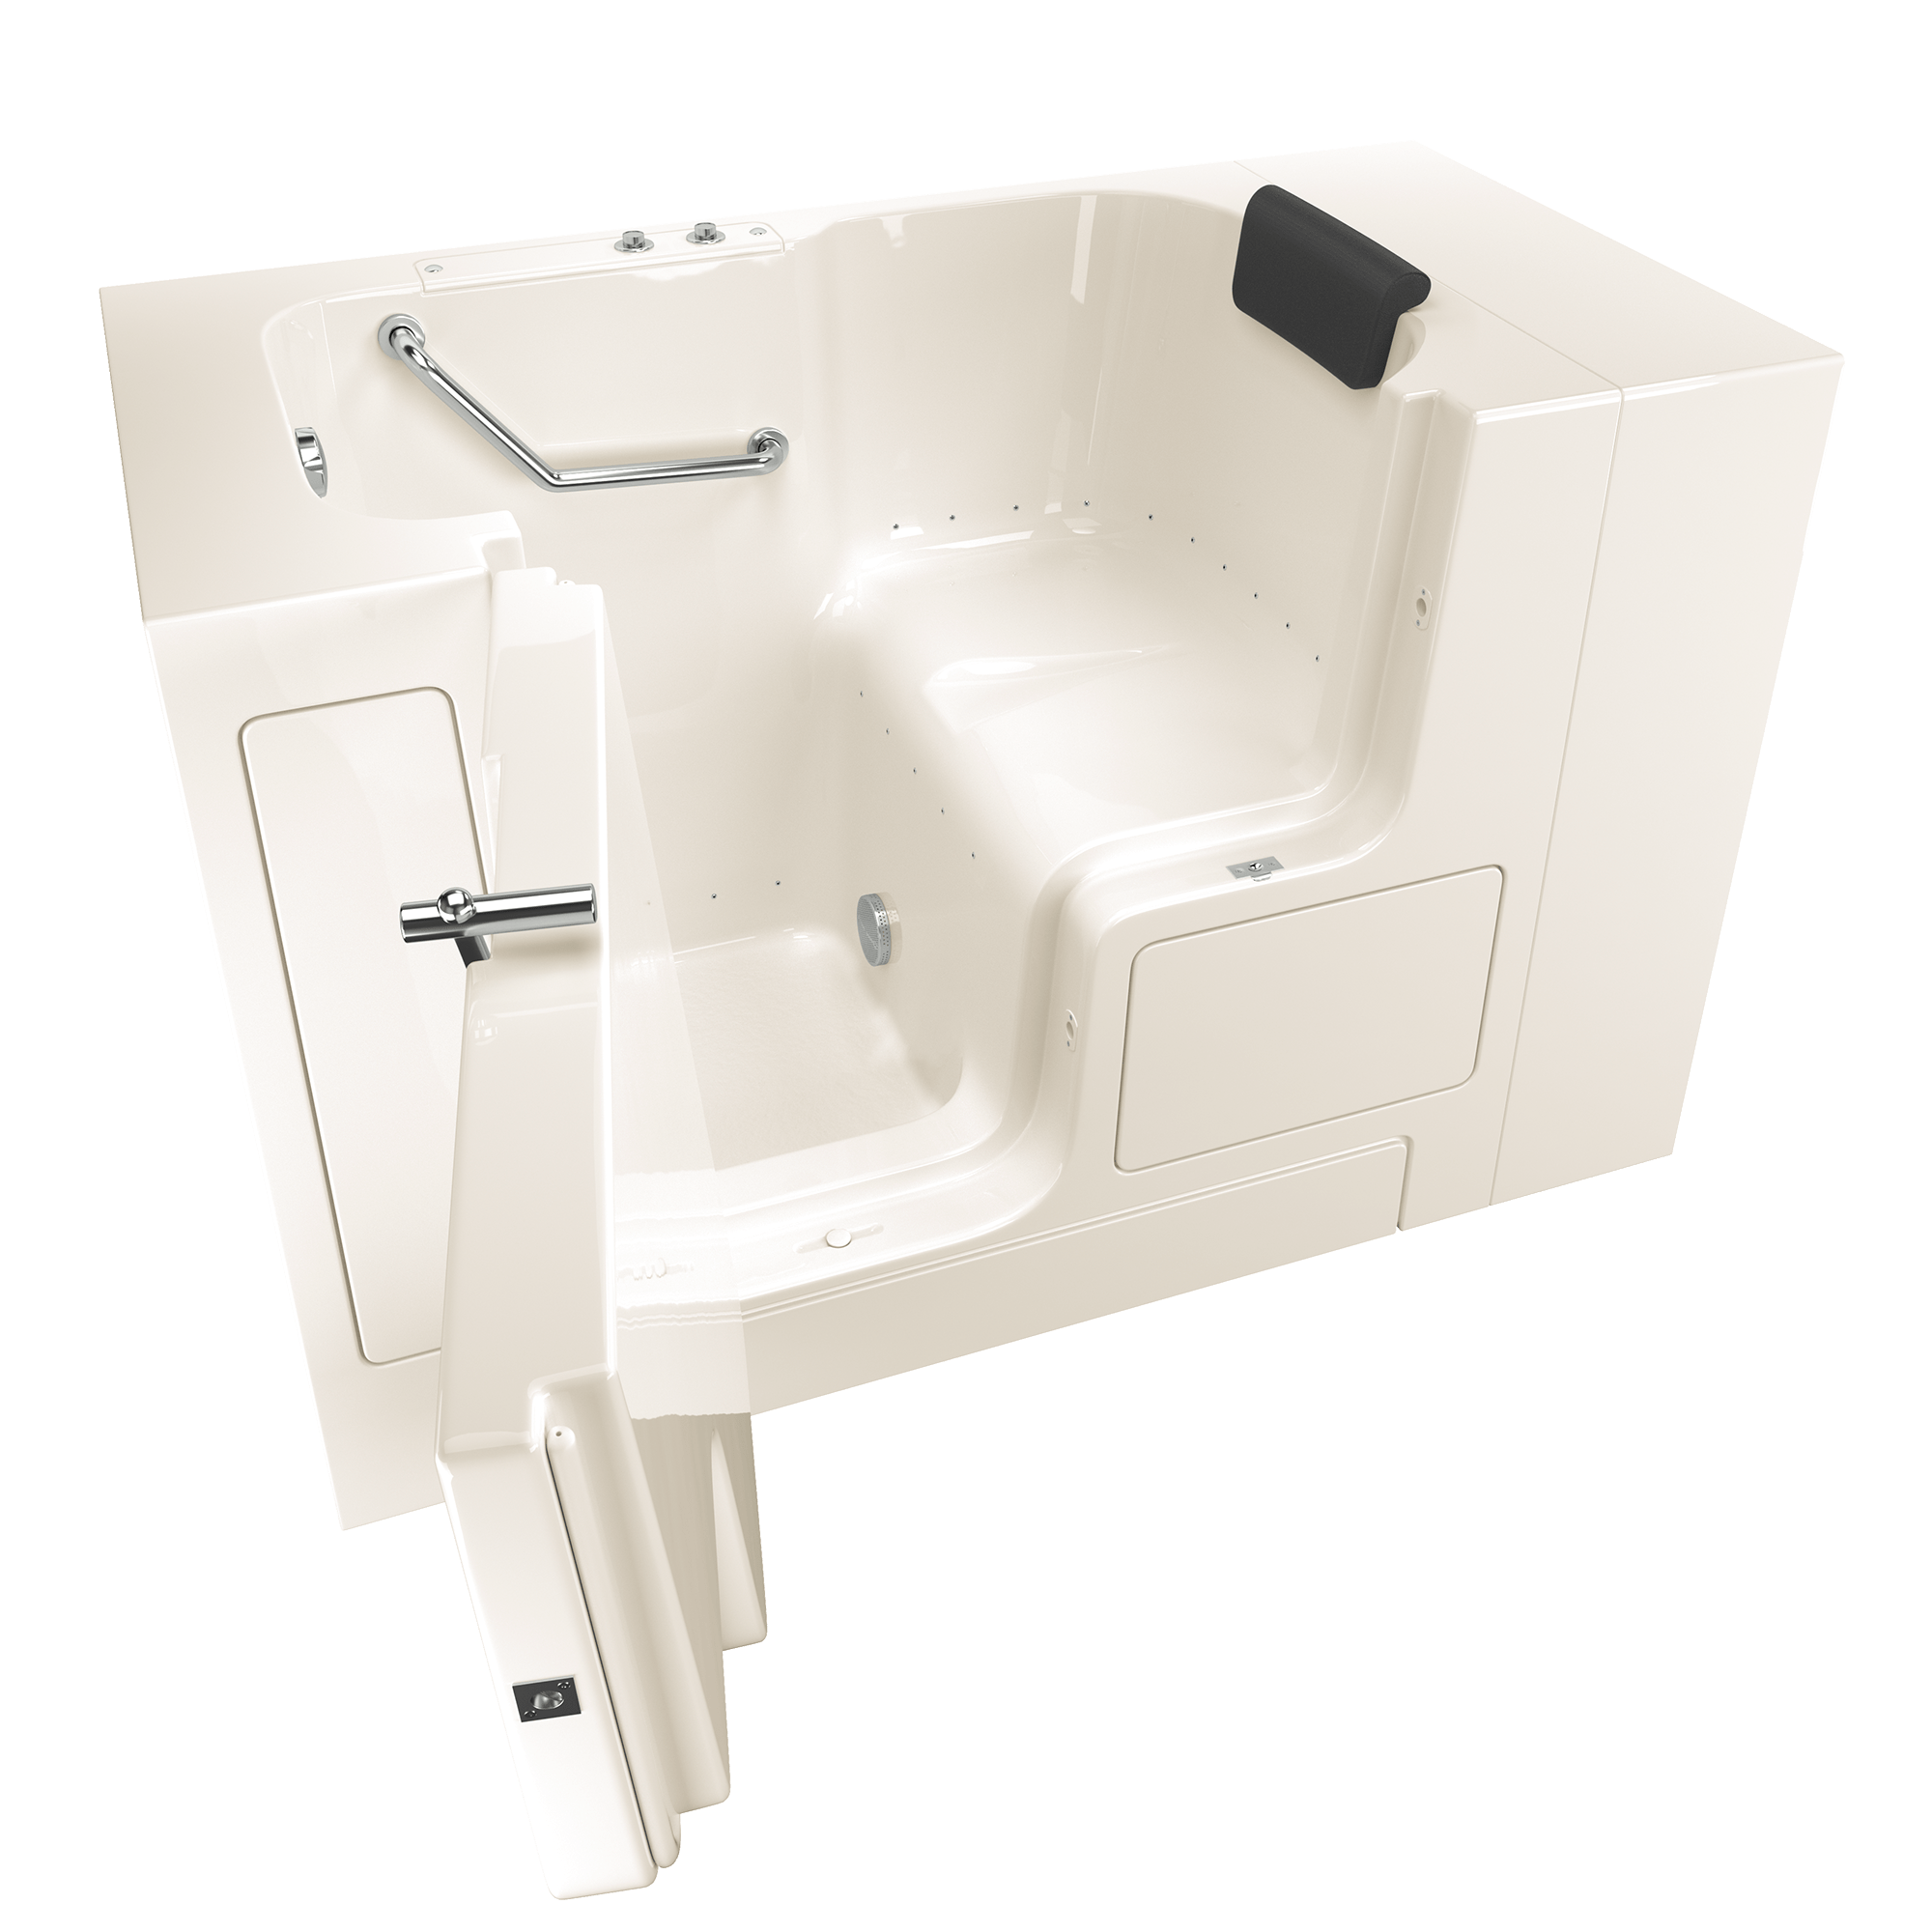 Gelcoat Premium Series 32 x 52 -Inch Walk-in Tub With Air Spa System - Left-Hand Drain